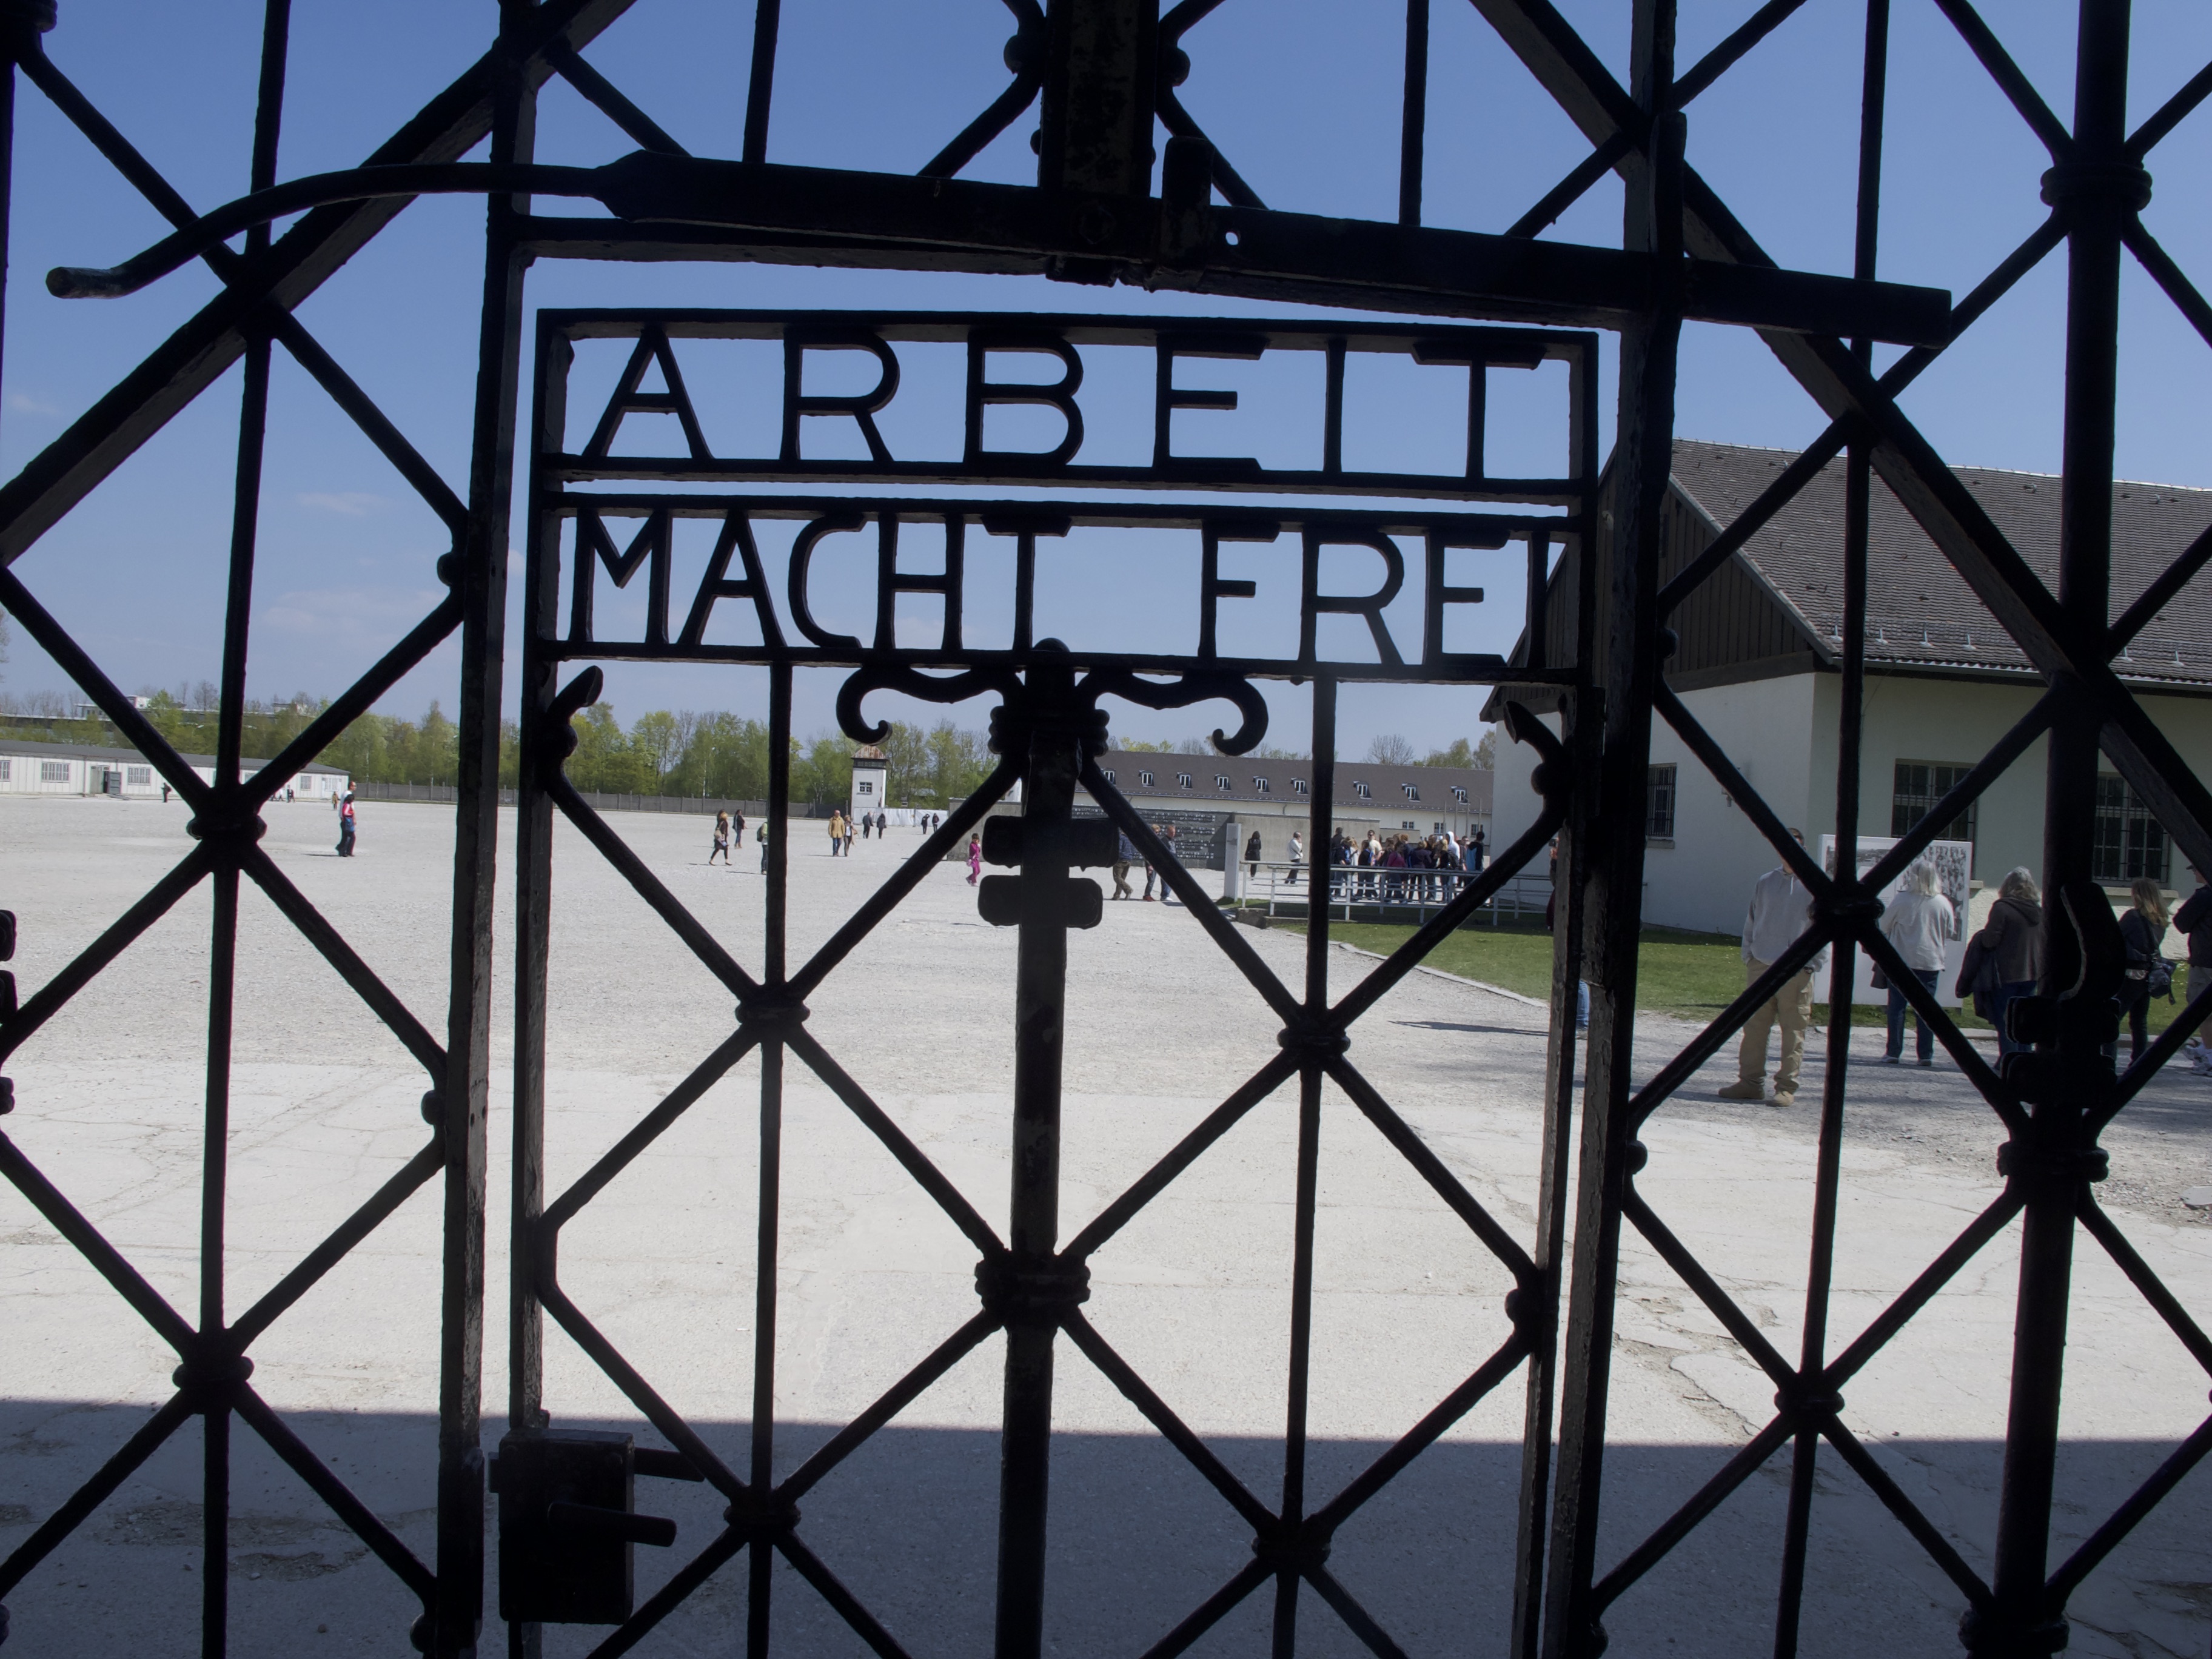 The gate to the Dachau Concentration Camp with the German words
"Albreit Macht Frei" - "Work Makes Free"